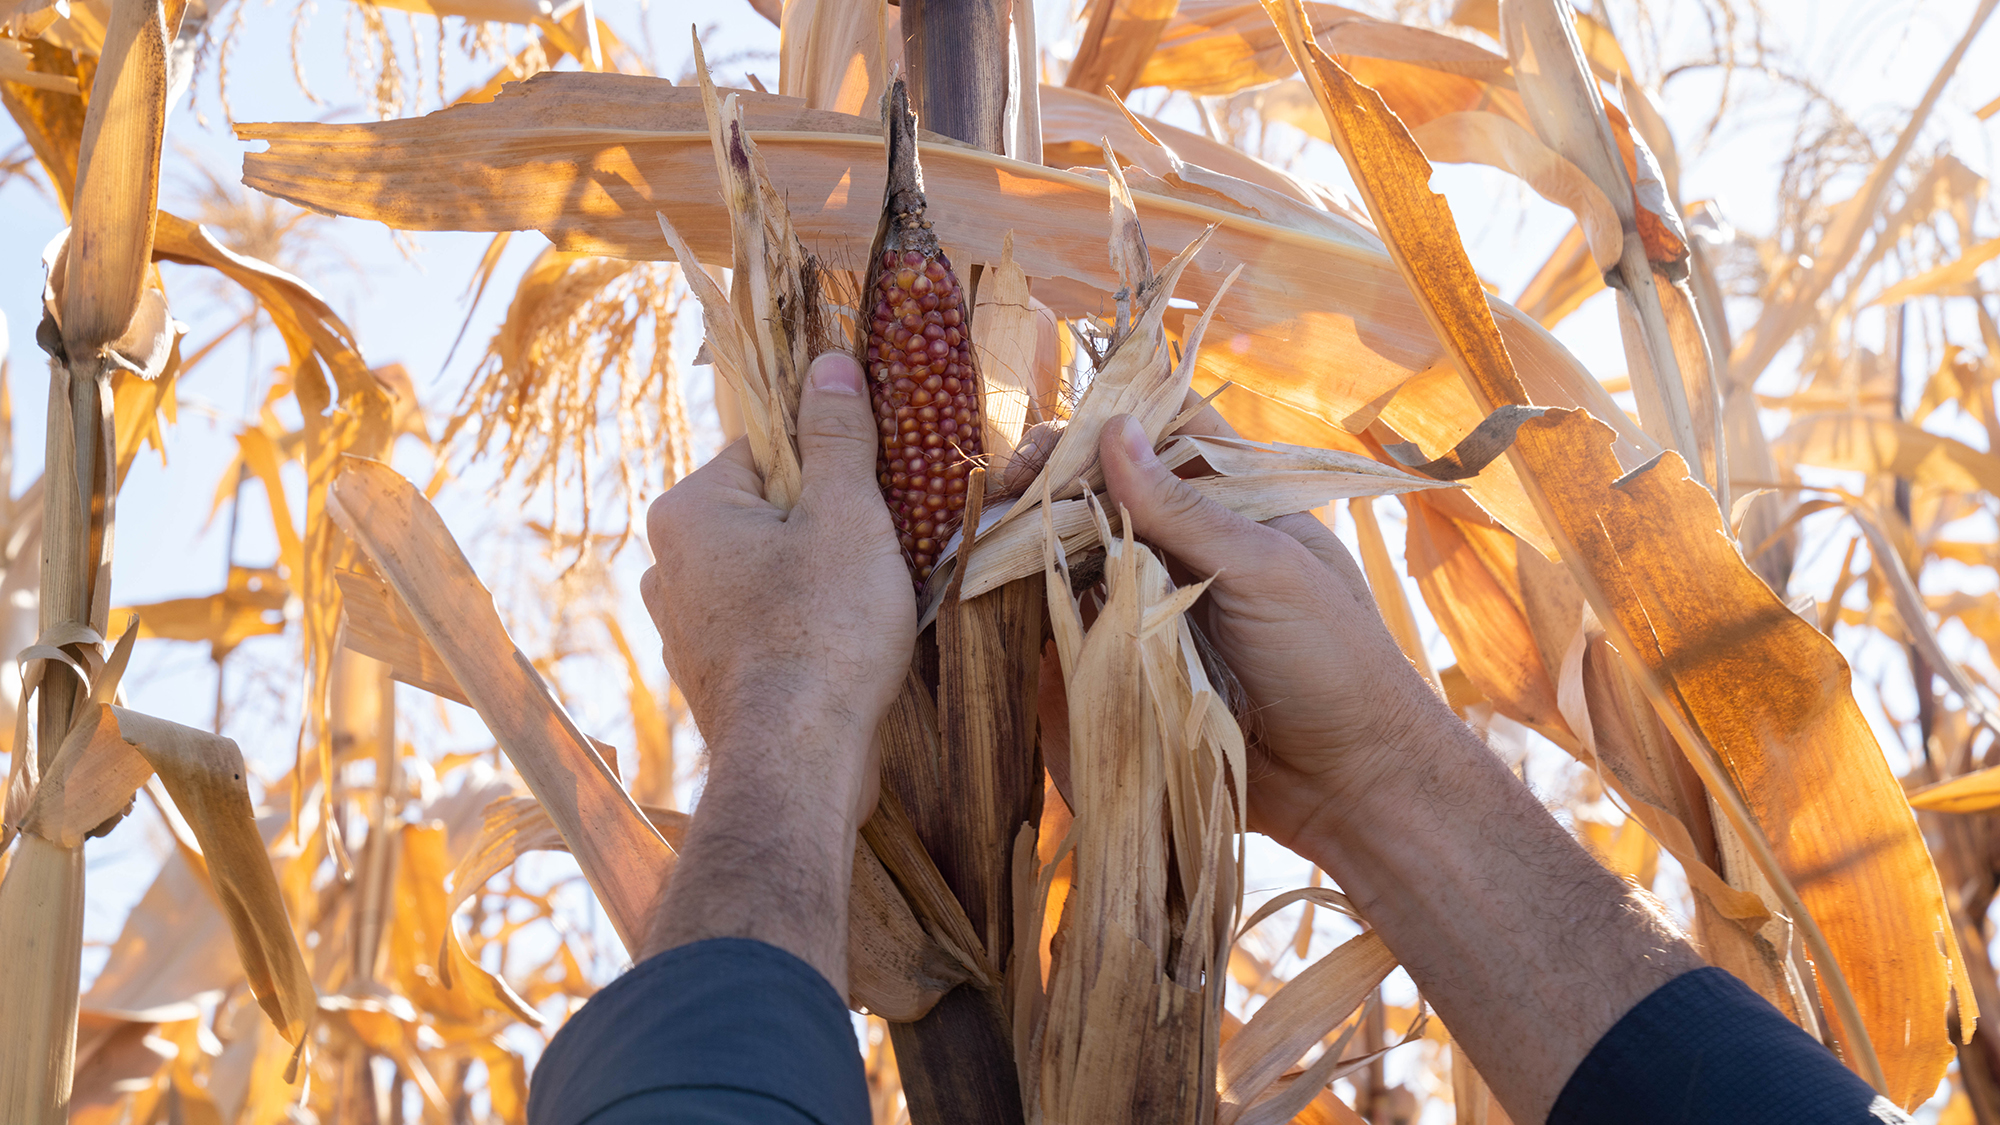 Dry maize being examined on the stalk